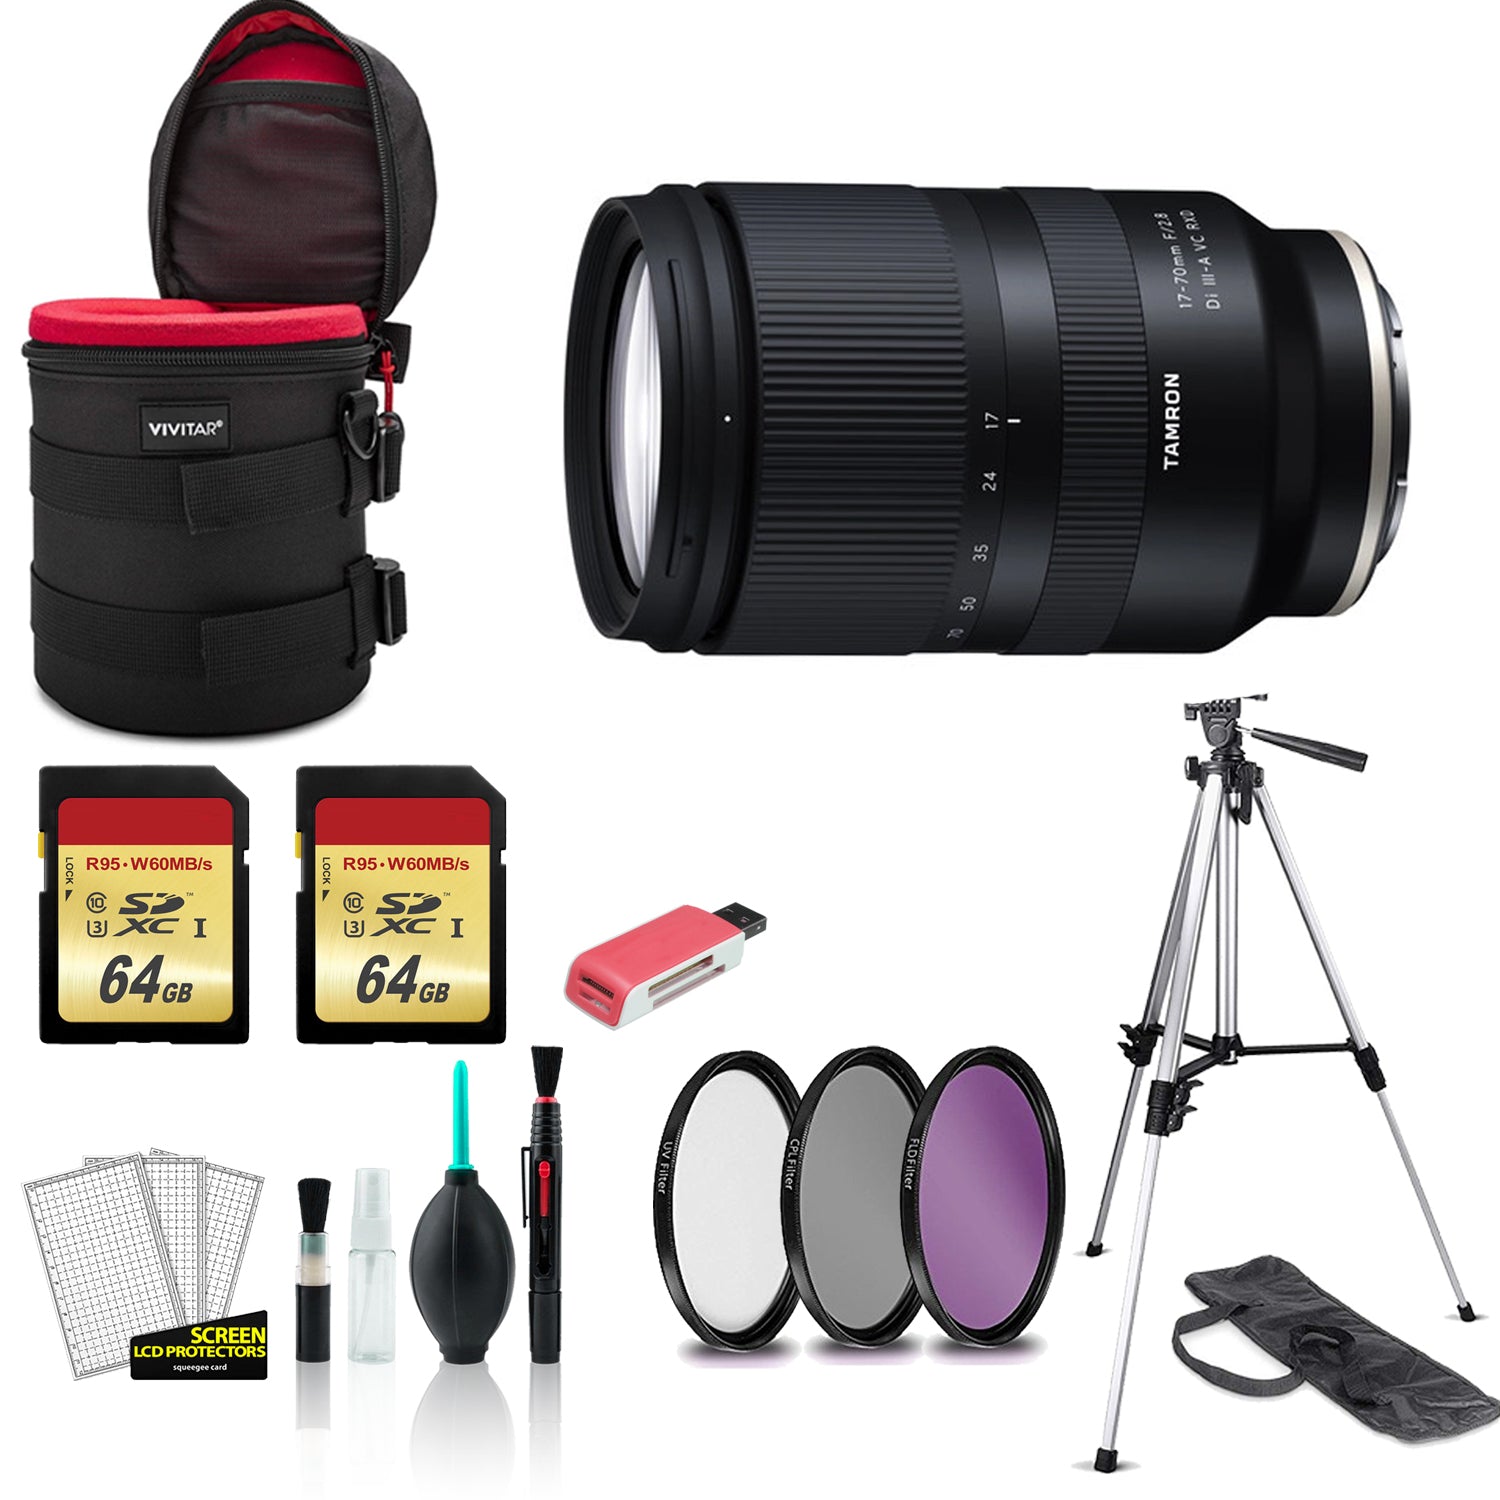 Tamron 18-300mm Lens for Sony E - Kit with Tripod, 2x 64GB Memory Card + More